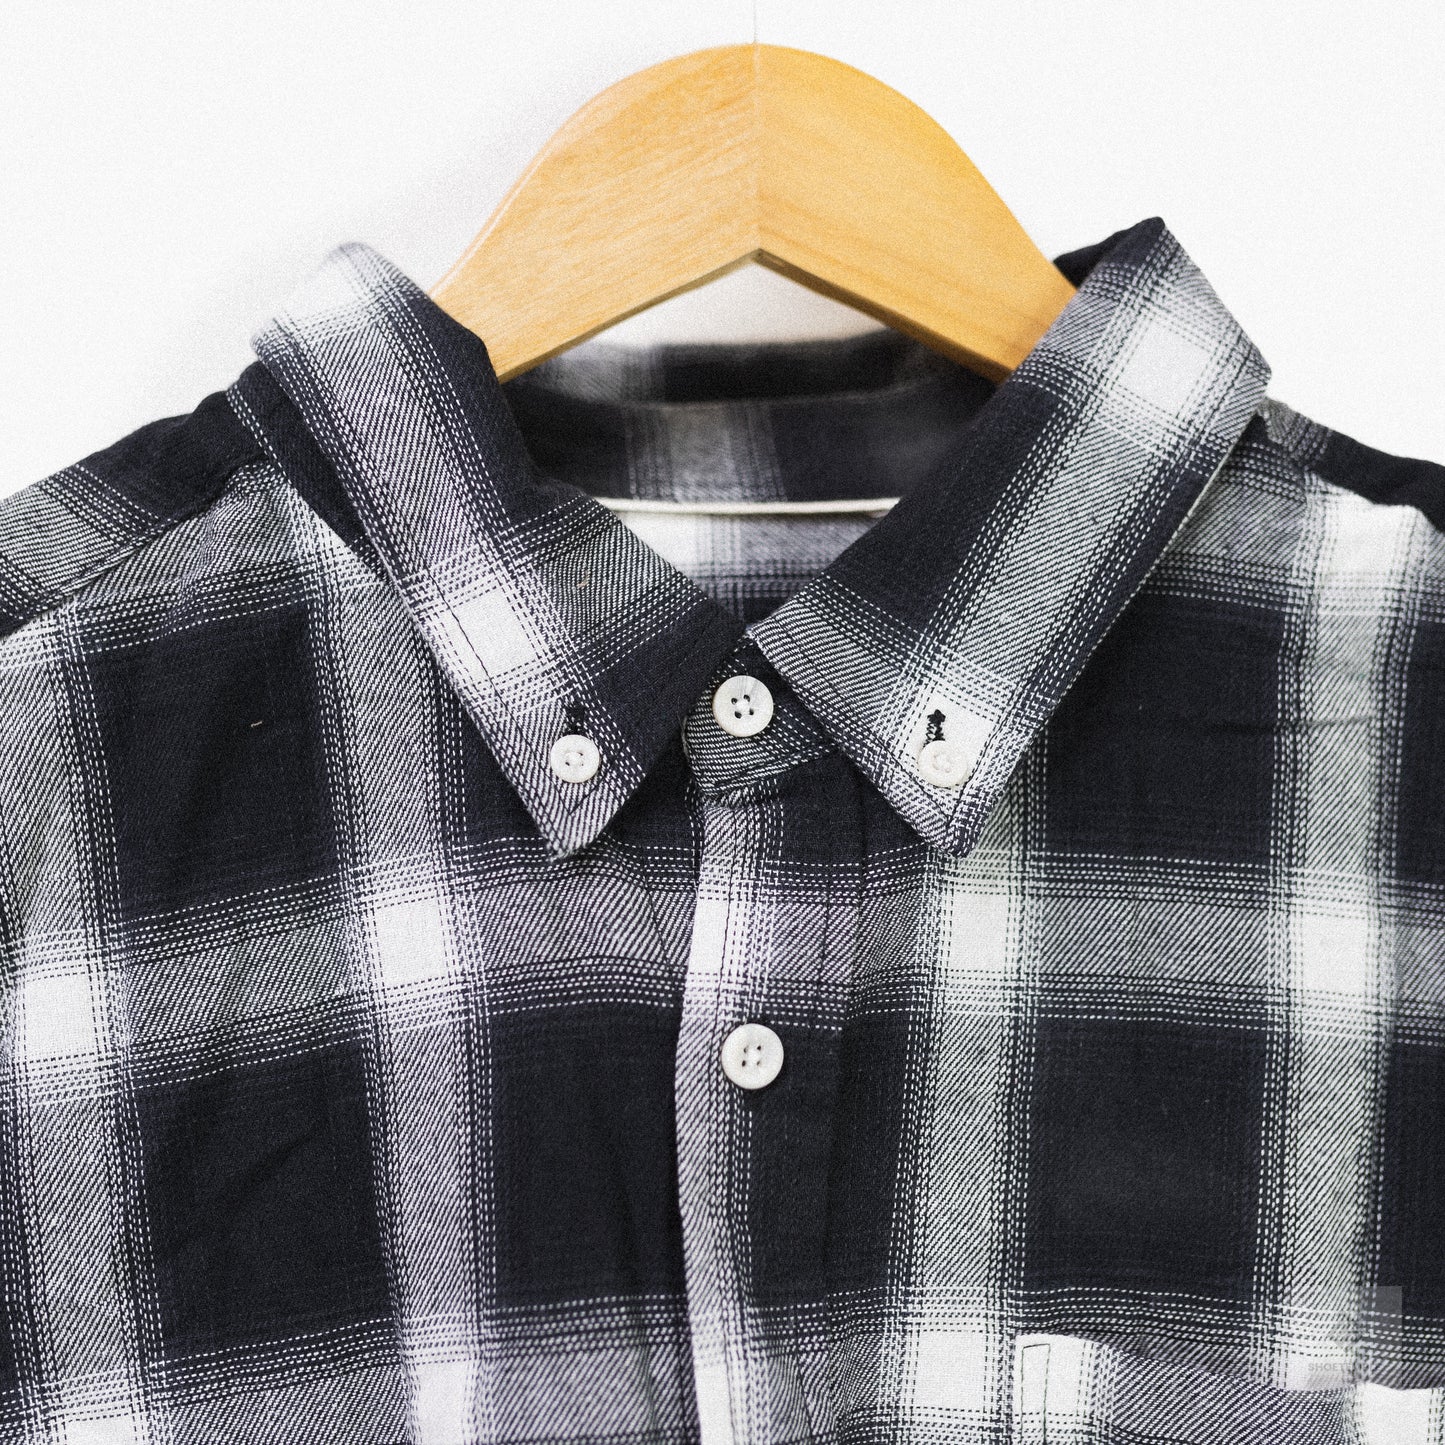 Rivers Flannel Shirt